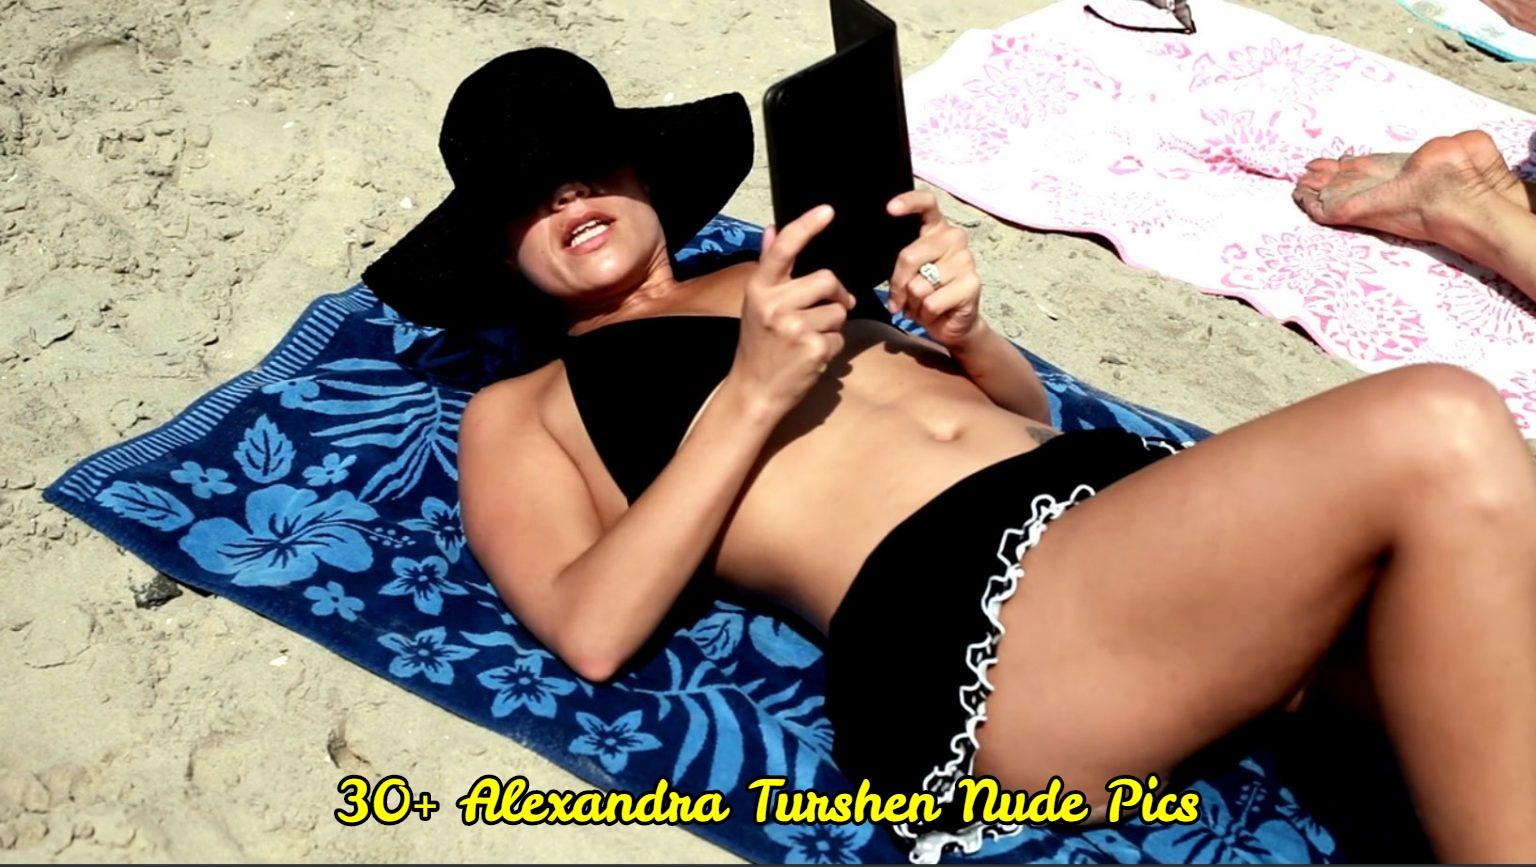 34 Alexandra Turshen Nude Pictures Display Her As A Skilled Performer | Best Of Comic Books